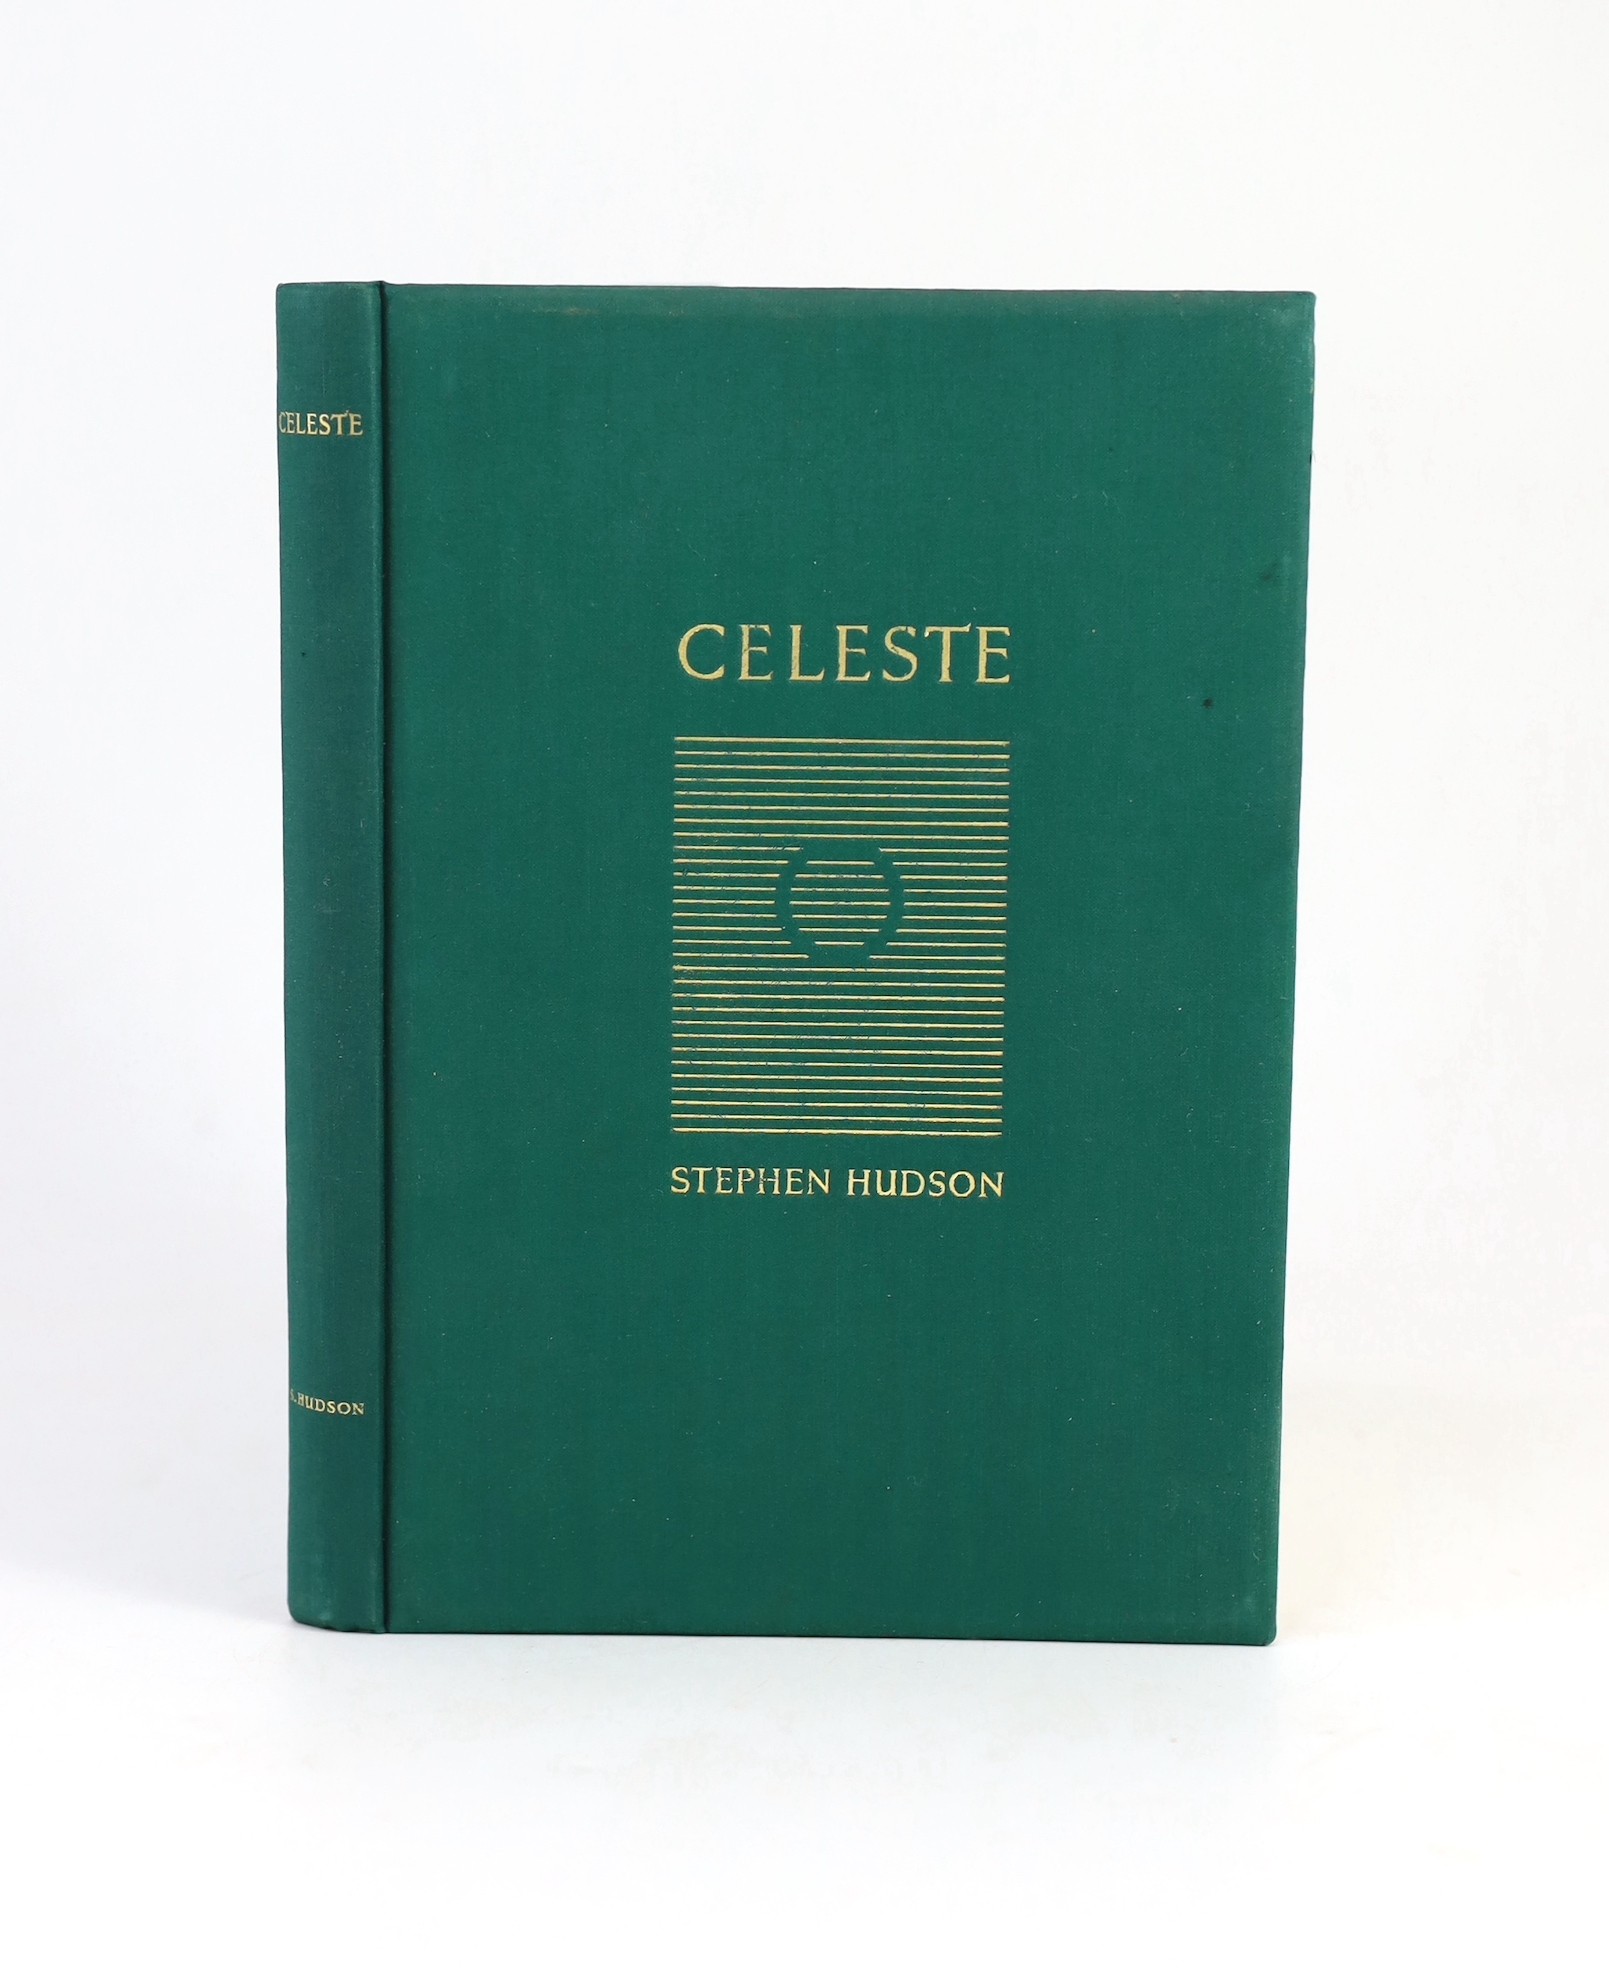 Hudson, Stephen - Celeste and Other Sketches, illustrated with 6 full page wood engravings by John Nash, one of 50 on Japanese vellum, signed by author and illustrator, 8vo, green dyed linen gilt, The Blackamore Press, 1